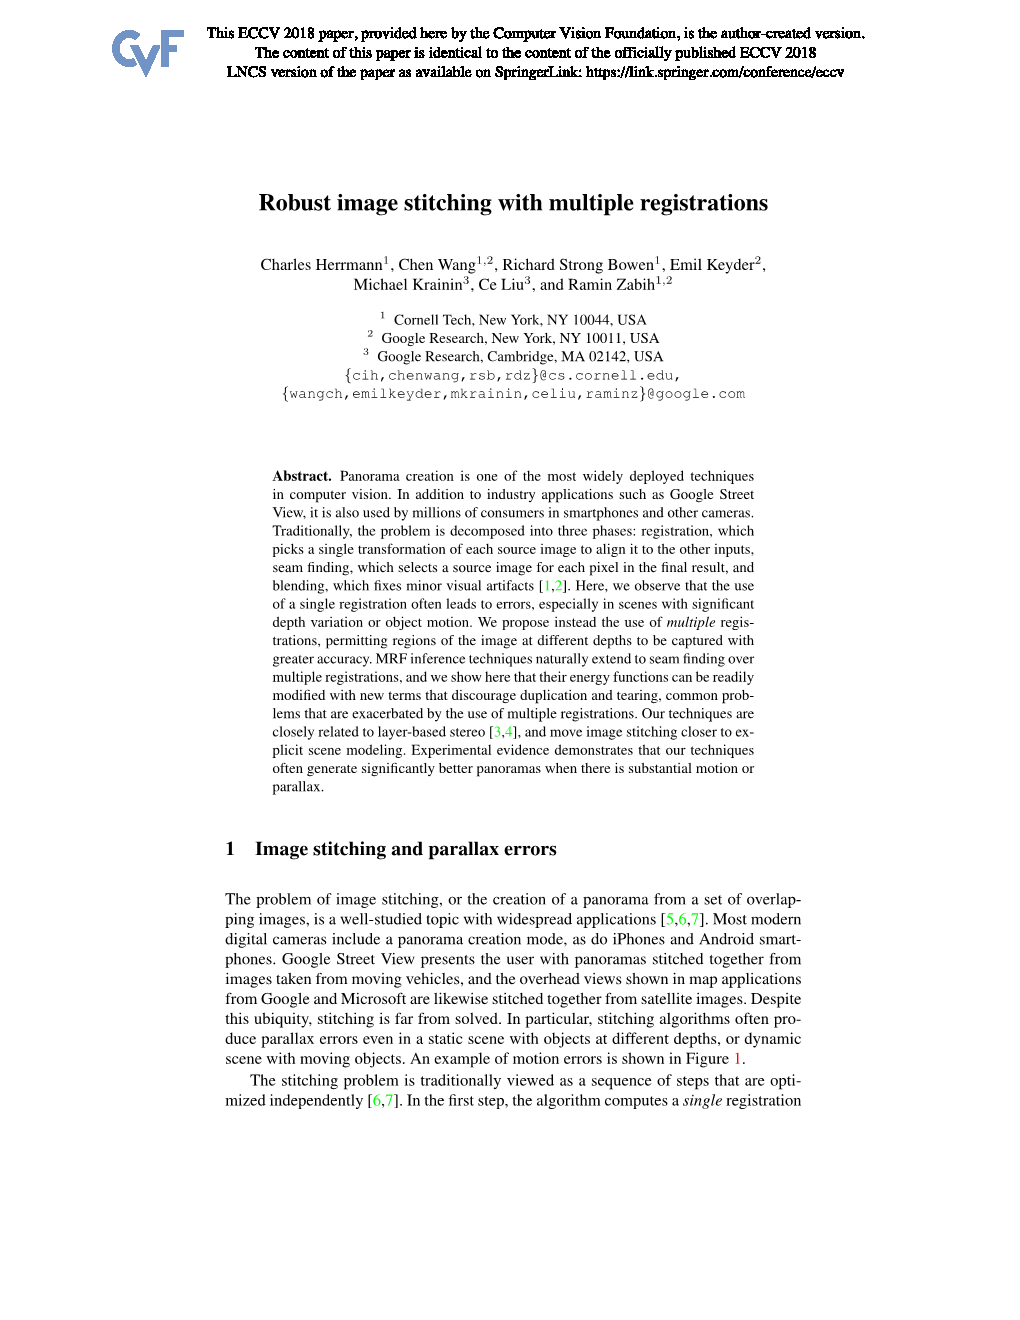 Robust Image Stitching Using Multiple Registrations